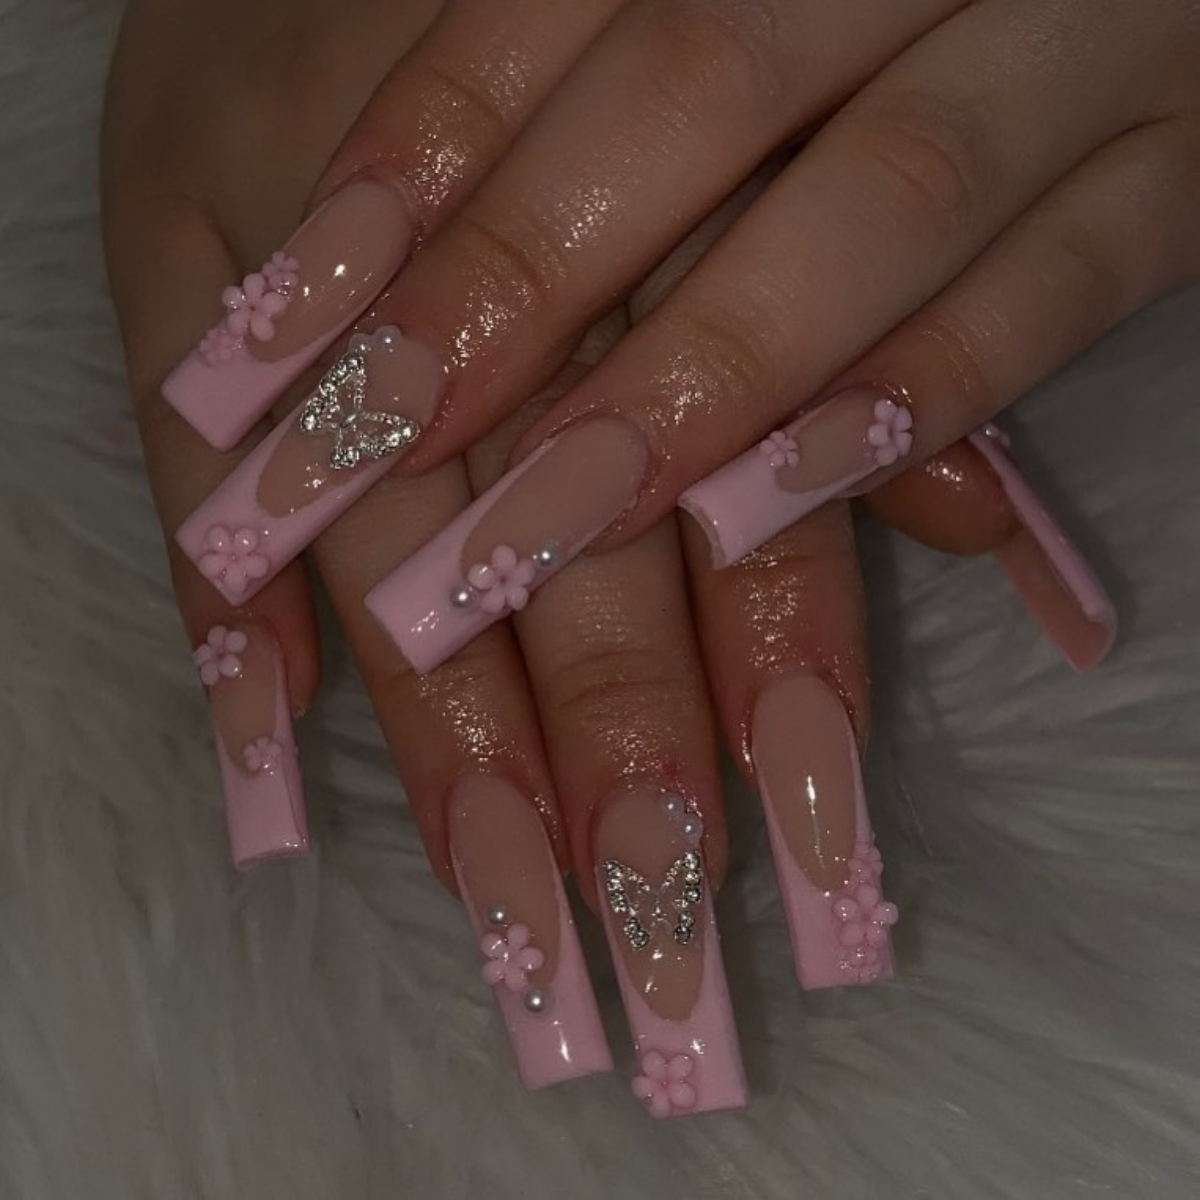 pink french tips with flowers and butterflies